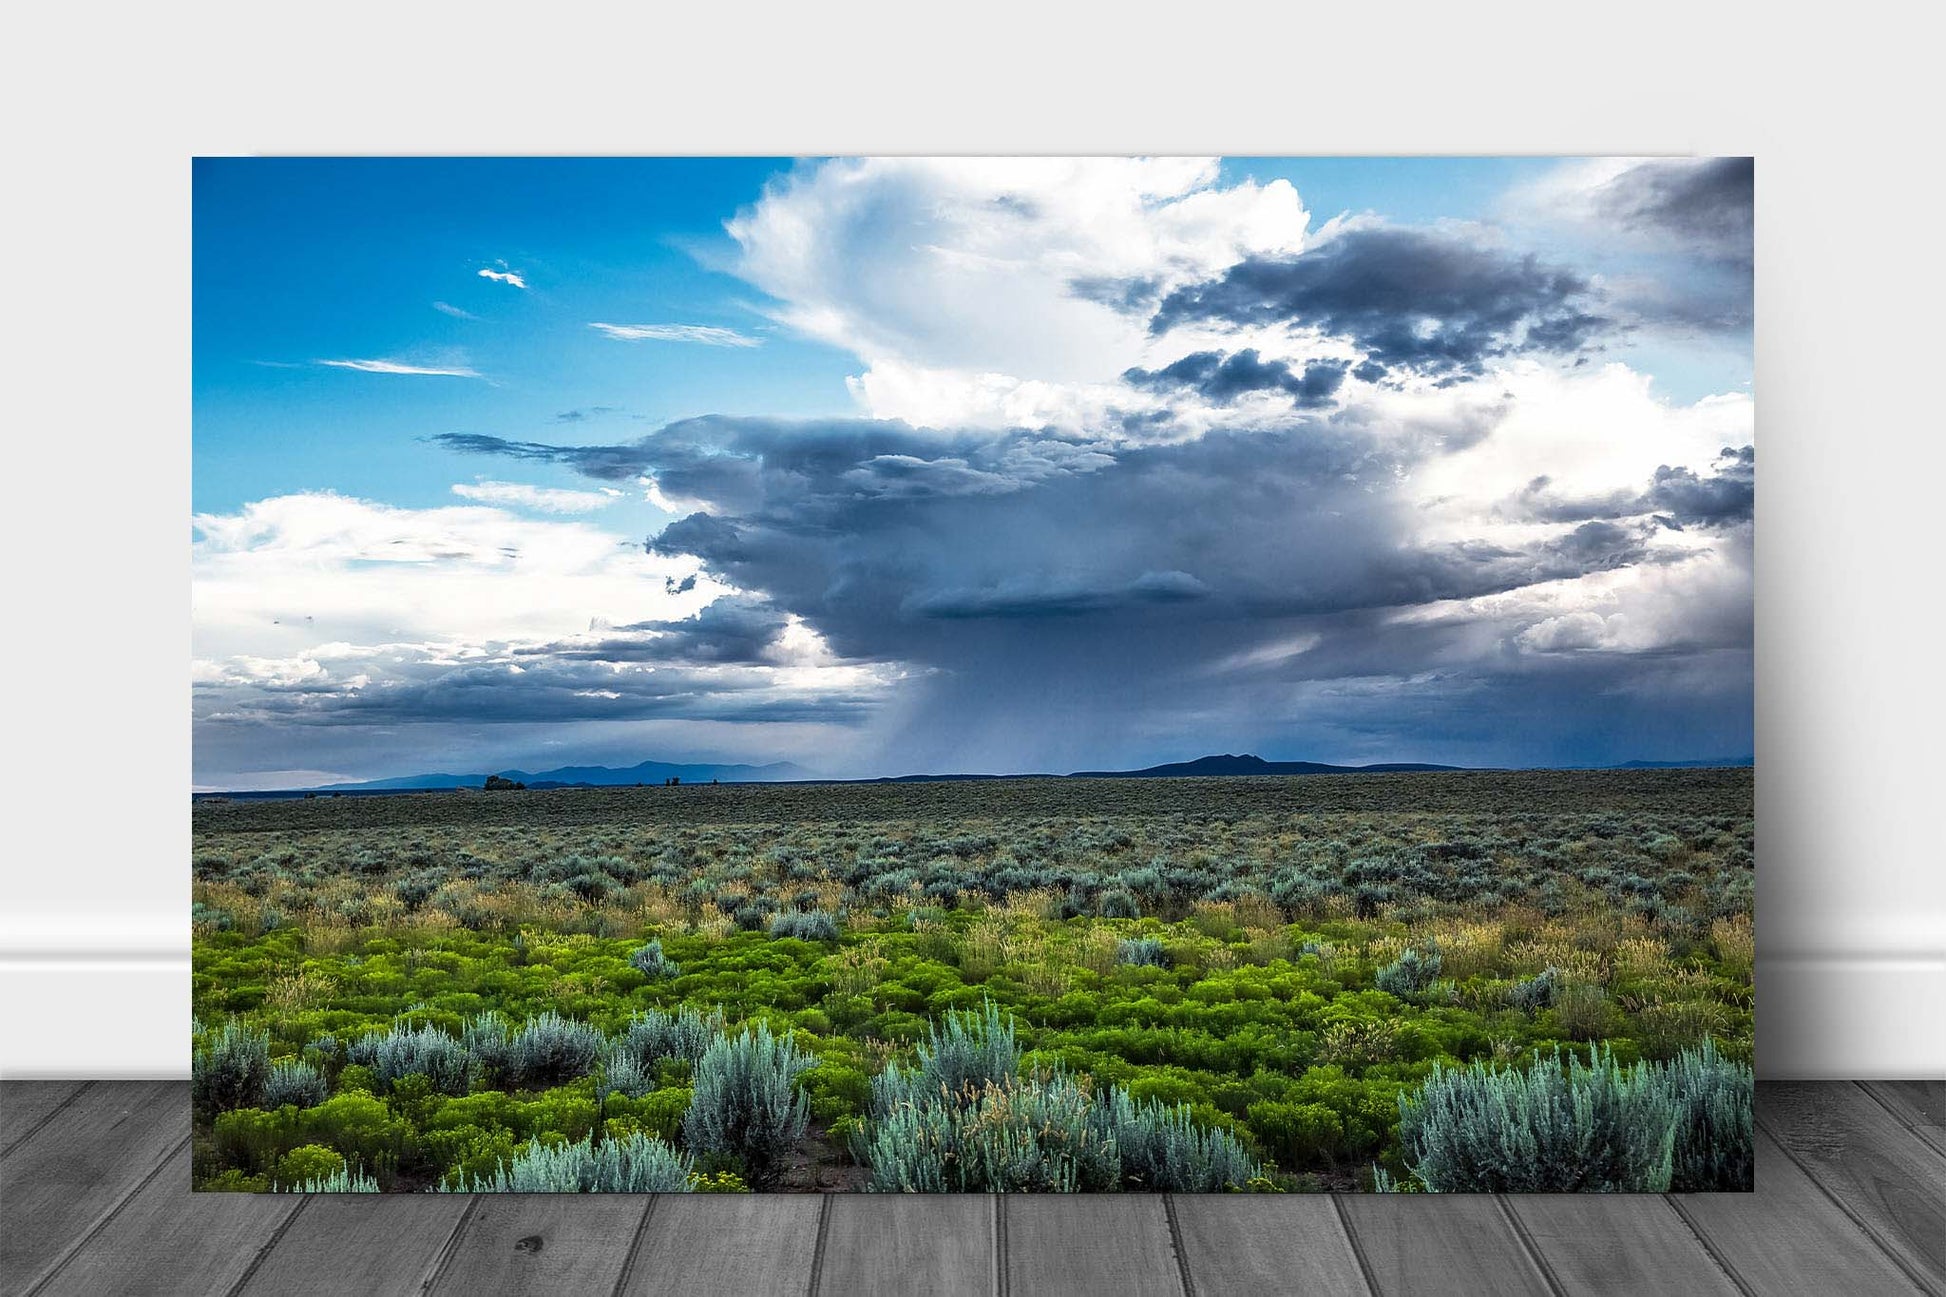 Southwest metal print on aluminum of a summer monsoon thunderstorm over sagebrush on a stormy day near Taos, New Mexico by Sean Ramsey of Southern Plains Photography.